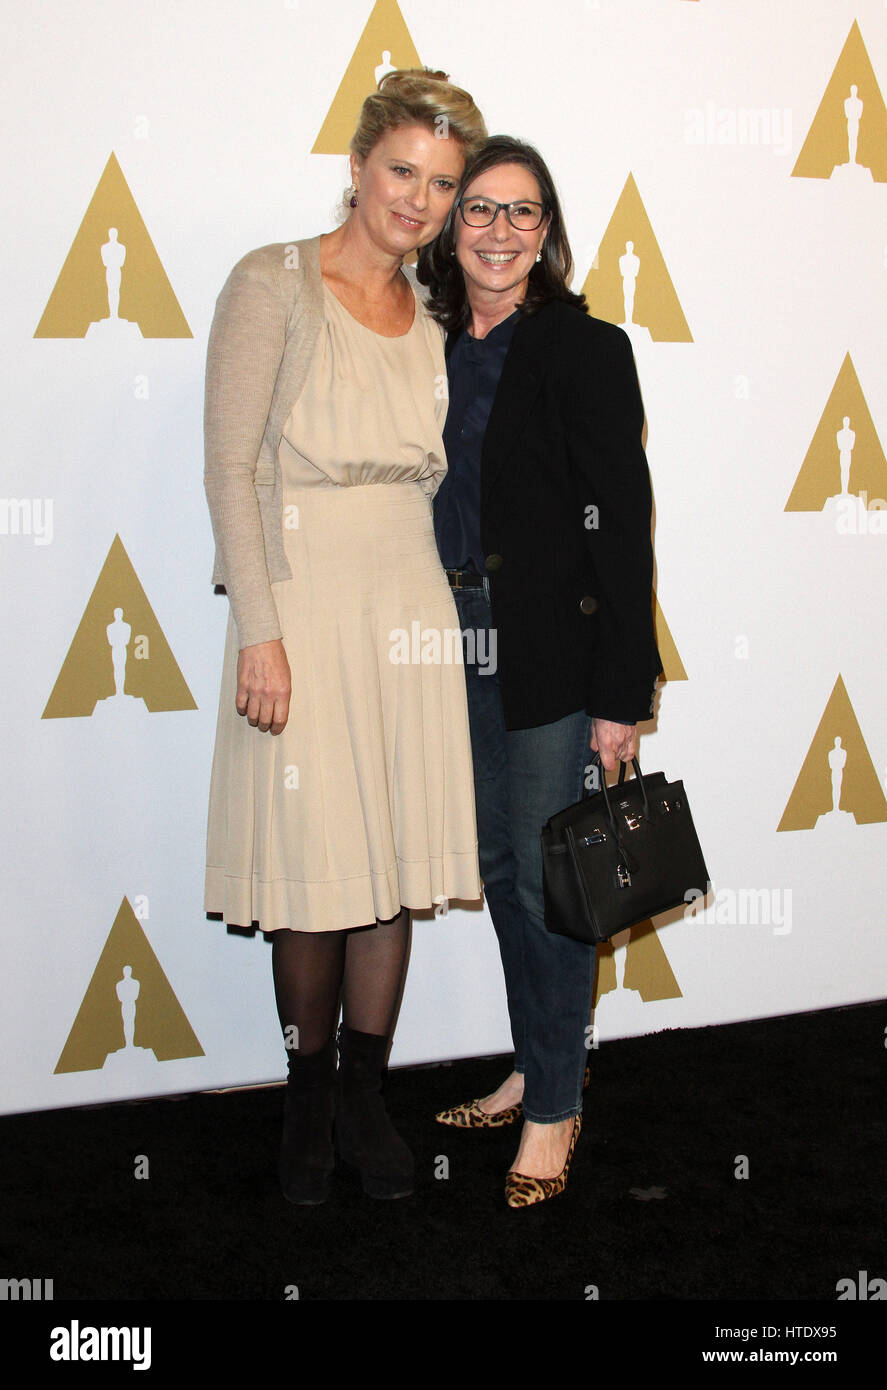 89th Oscars Nominees Luncheon 2017 held in the Grand Ballroom at the Beverly Hilton Hotel in Beverly Hills.  Featuring: Jenno Topping, Donna Gigliotti Where: Los Angeles, California, United States When: 06 Feb 2017 Stock Photo